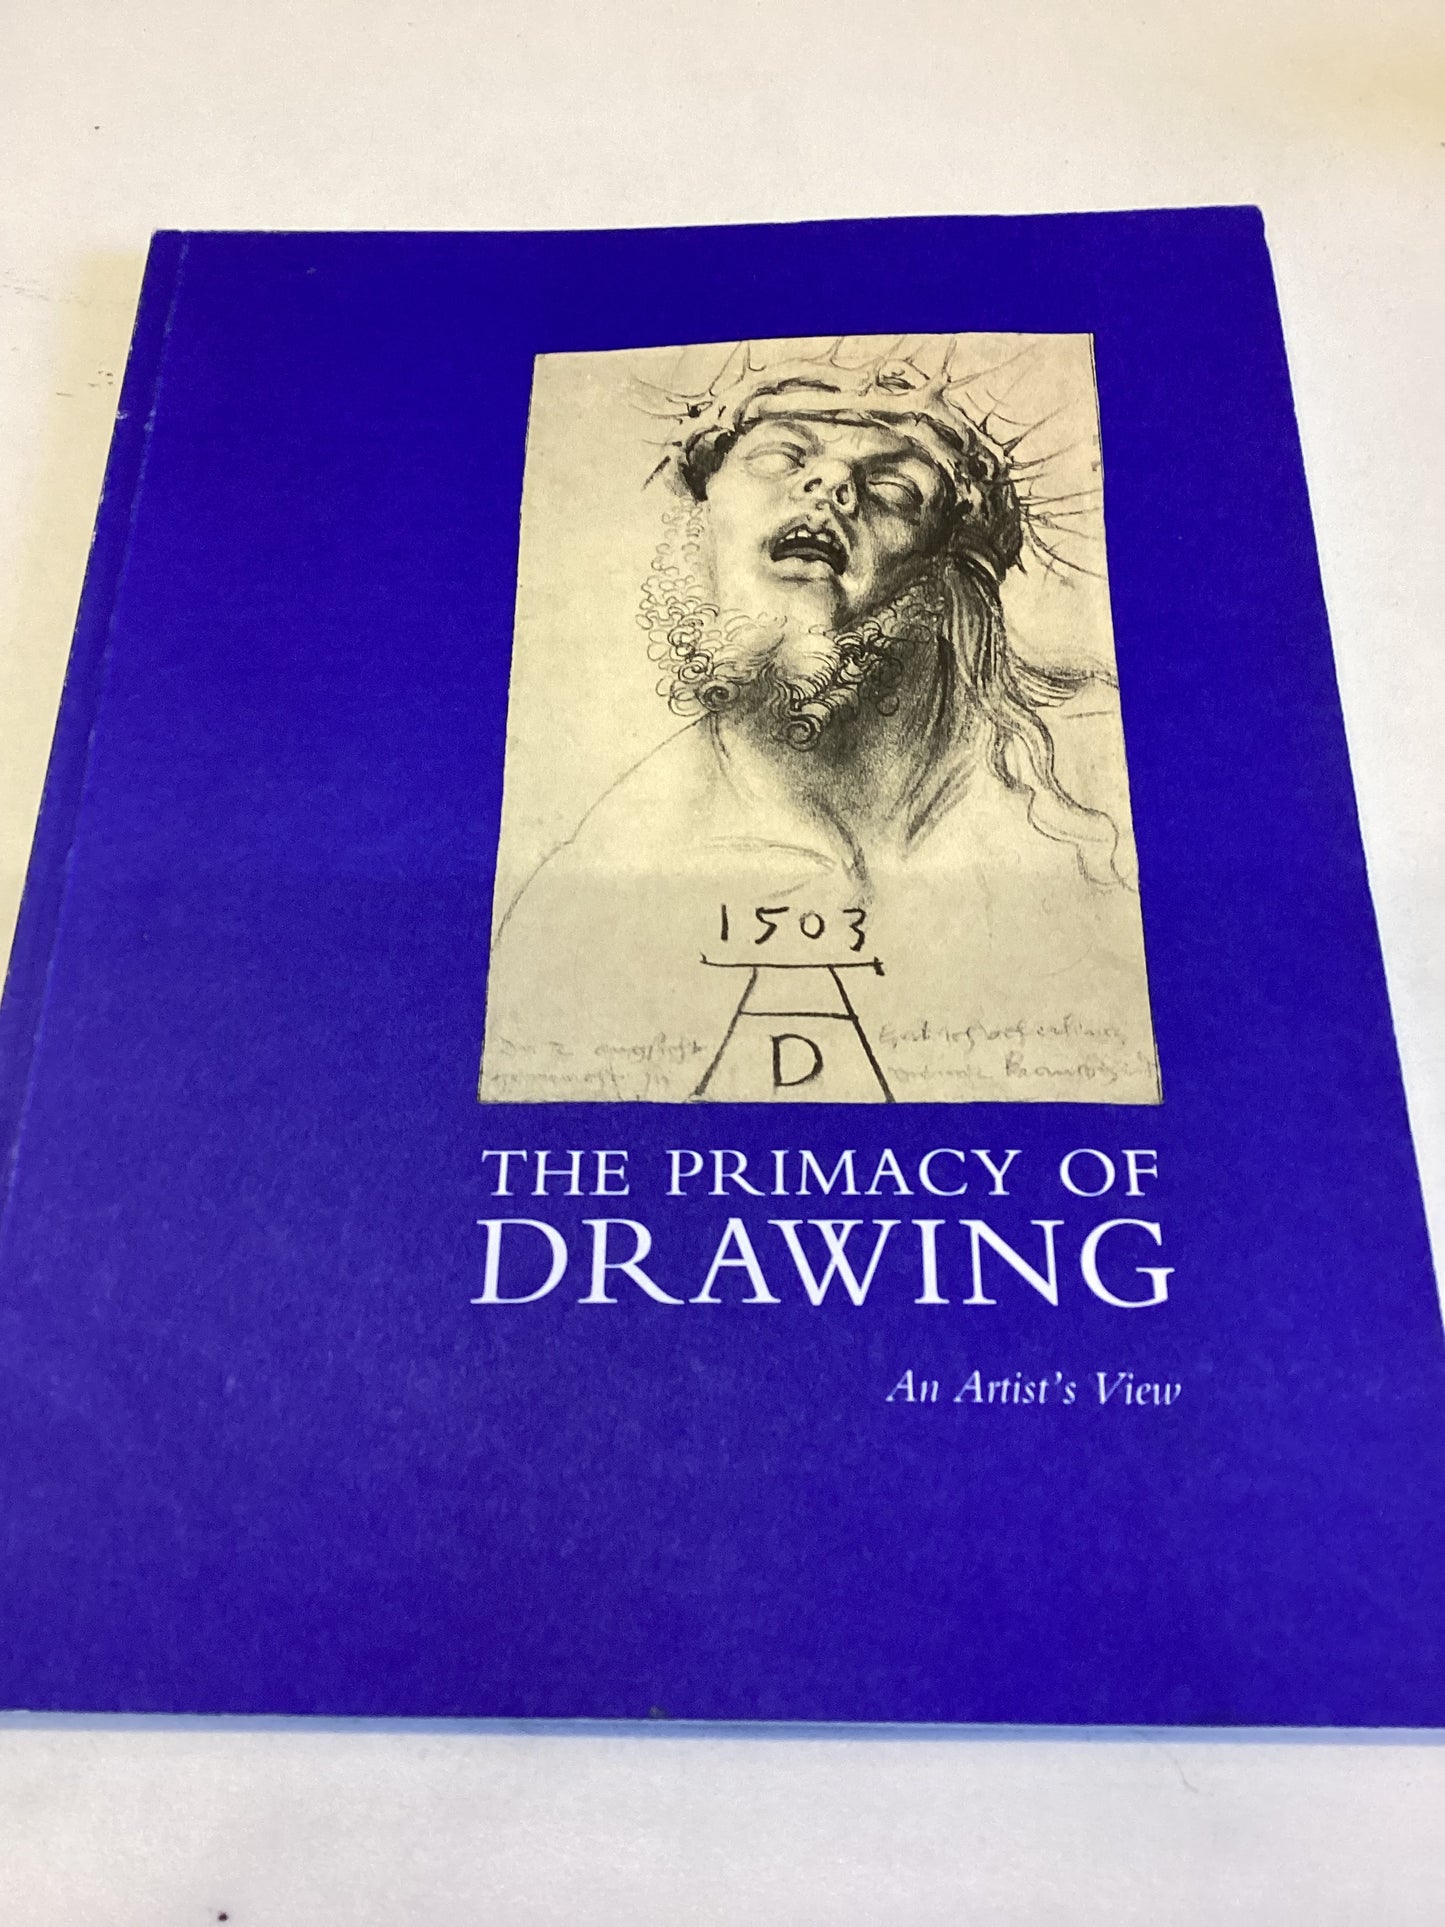 The Primacy of Drawings An Artists View A National Touring Exhibition from The South Bank Centre 1991 Deanna Petherbridge